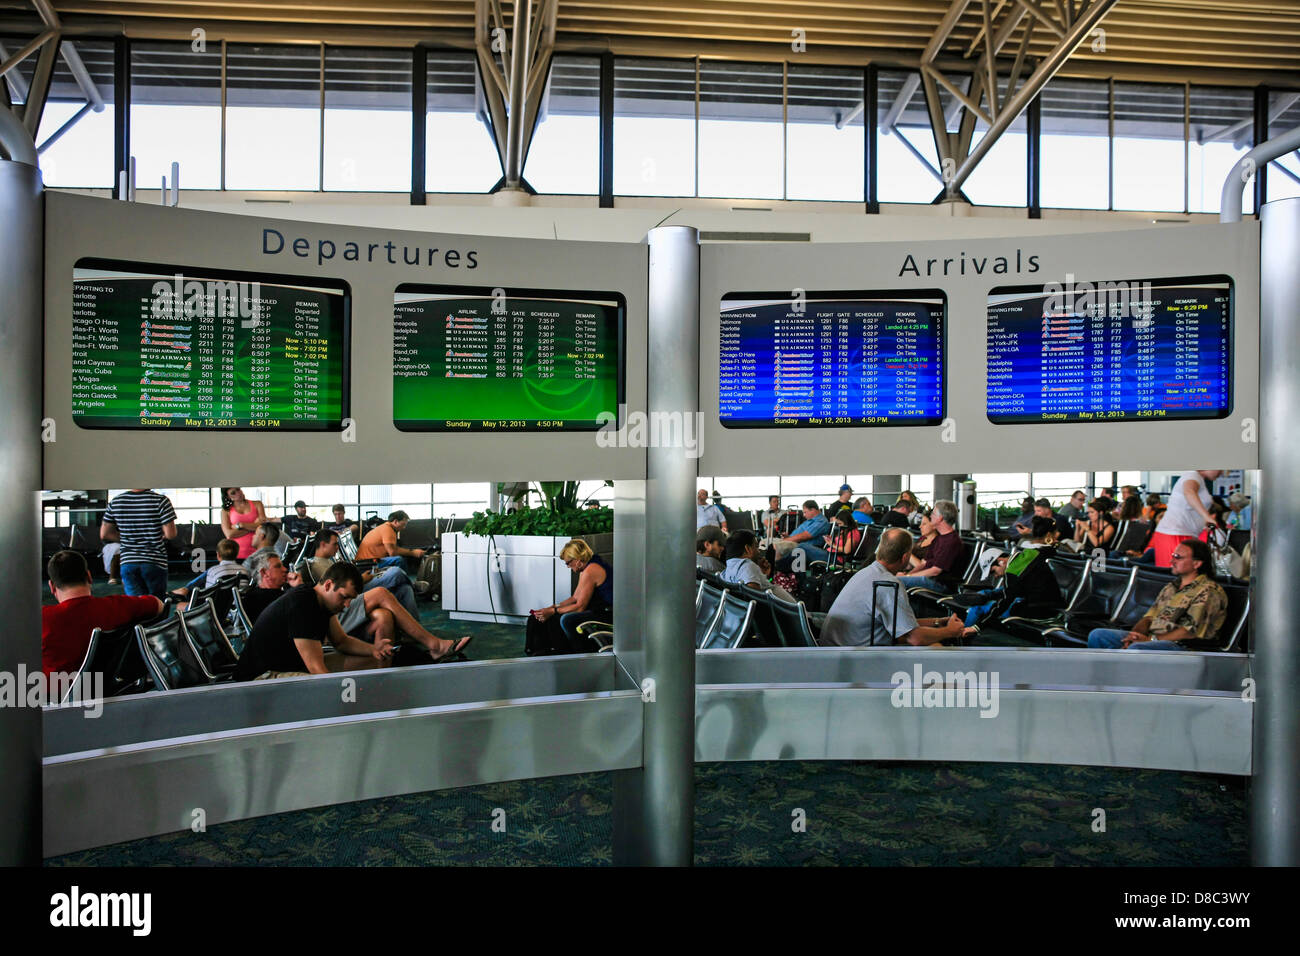 Departures and Arrivals board inside Tampa Airport Florida Stock Photo